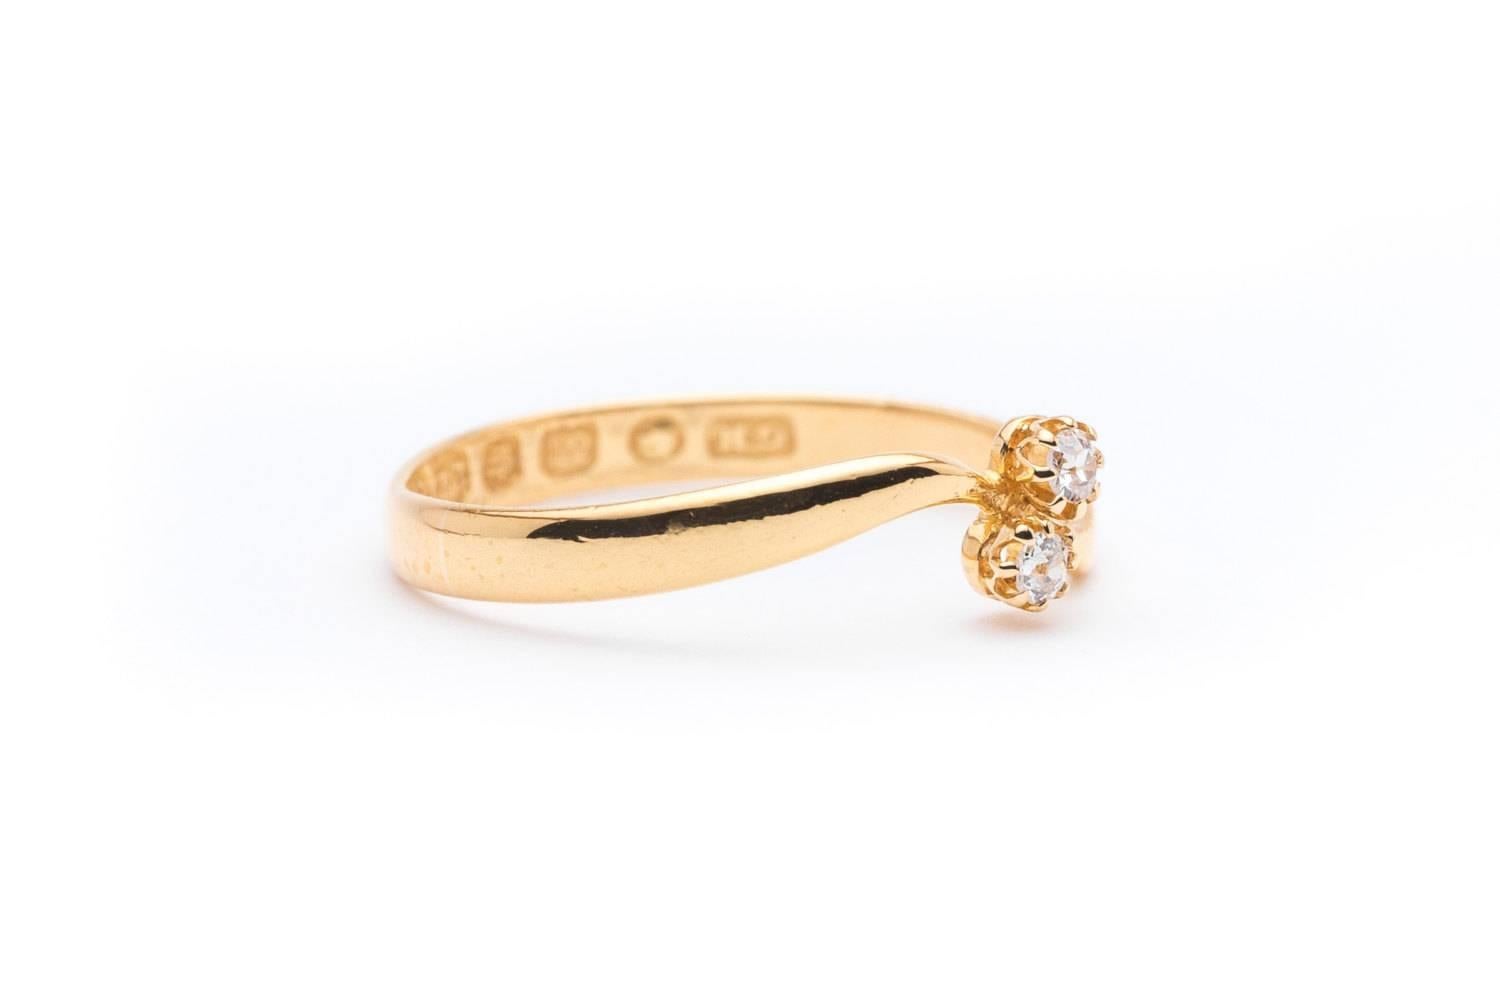 Beacon Hill Jewelers Presents:

An English 22 karat yellow gold toi et moi diamond ring hallmarked for Birmingham England. Featuring two old mine cut diamonds, this ring is a classic example of a timeless and desirable toi et moi ring.

In excellent